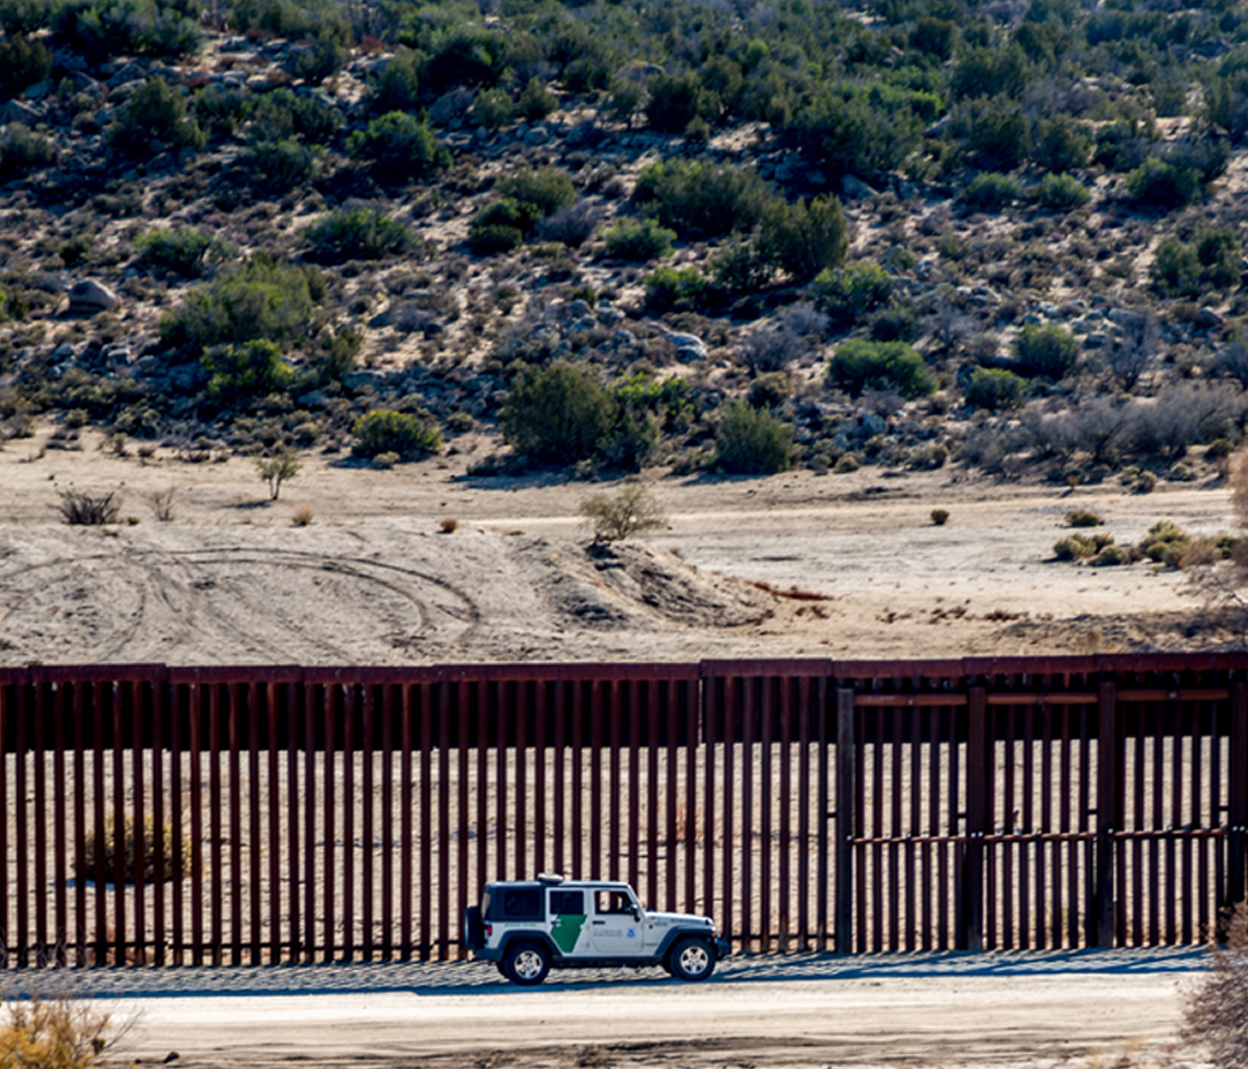 View of the border wall in the desert